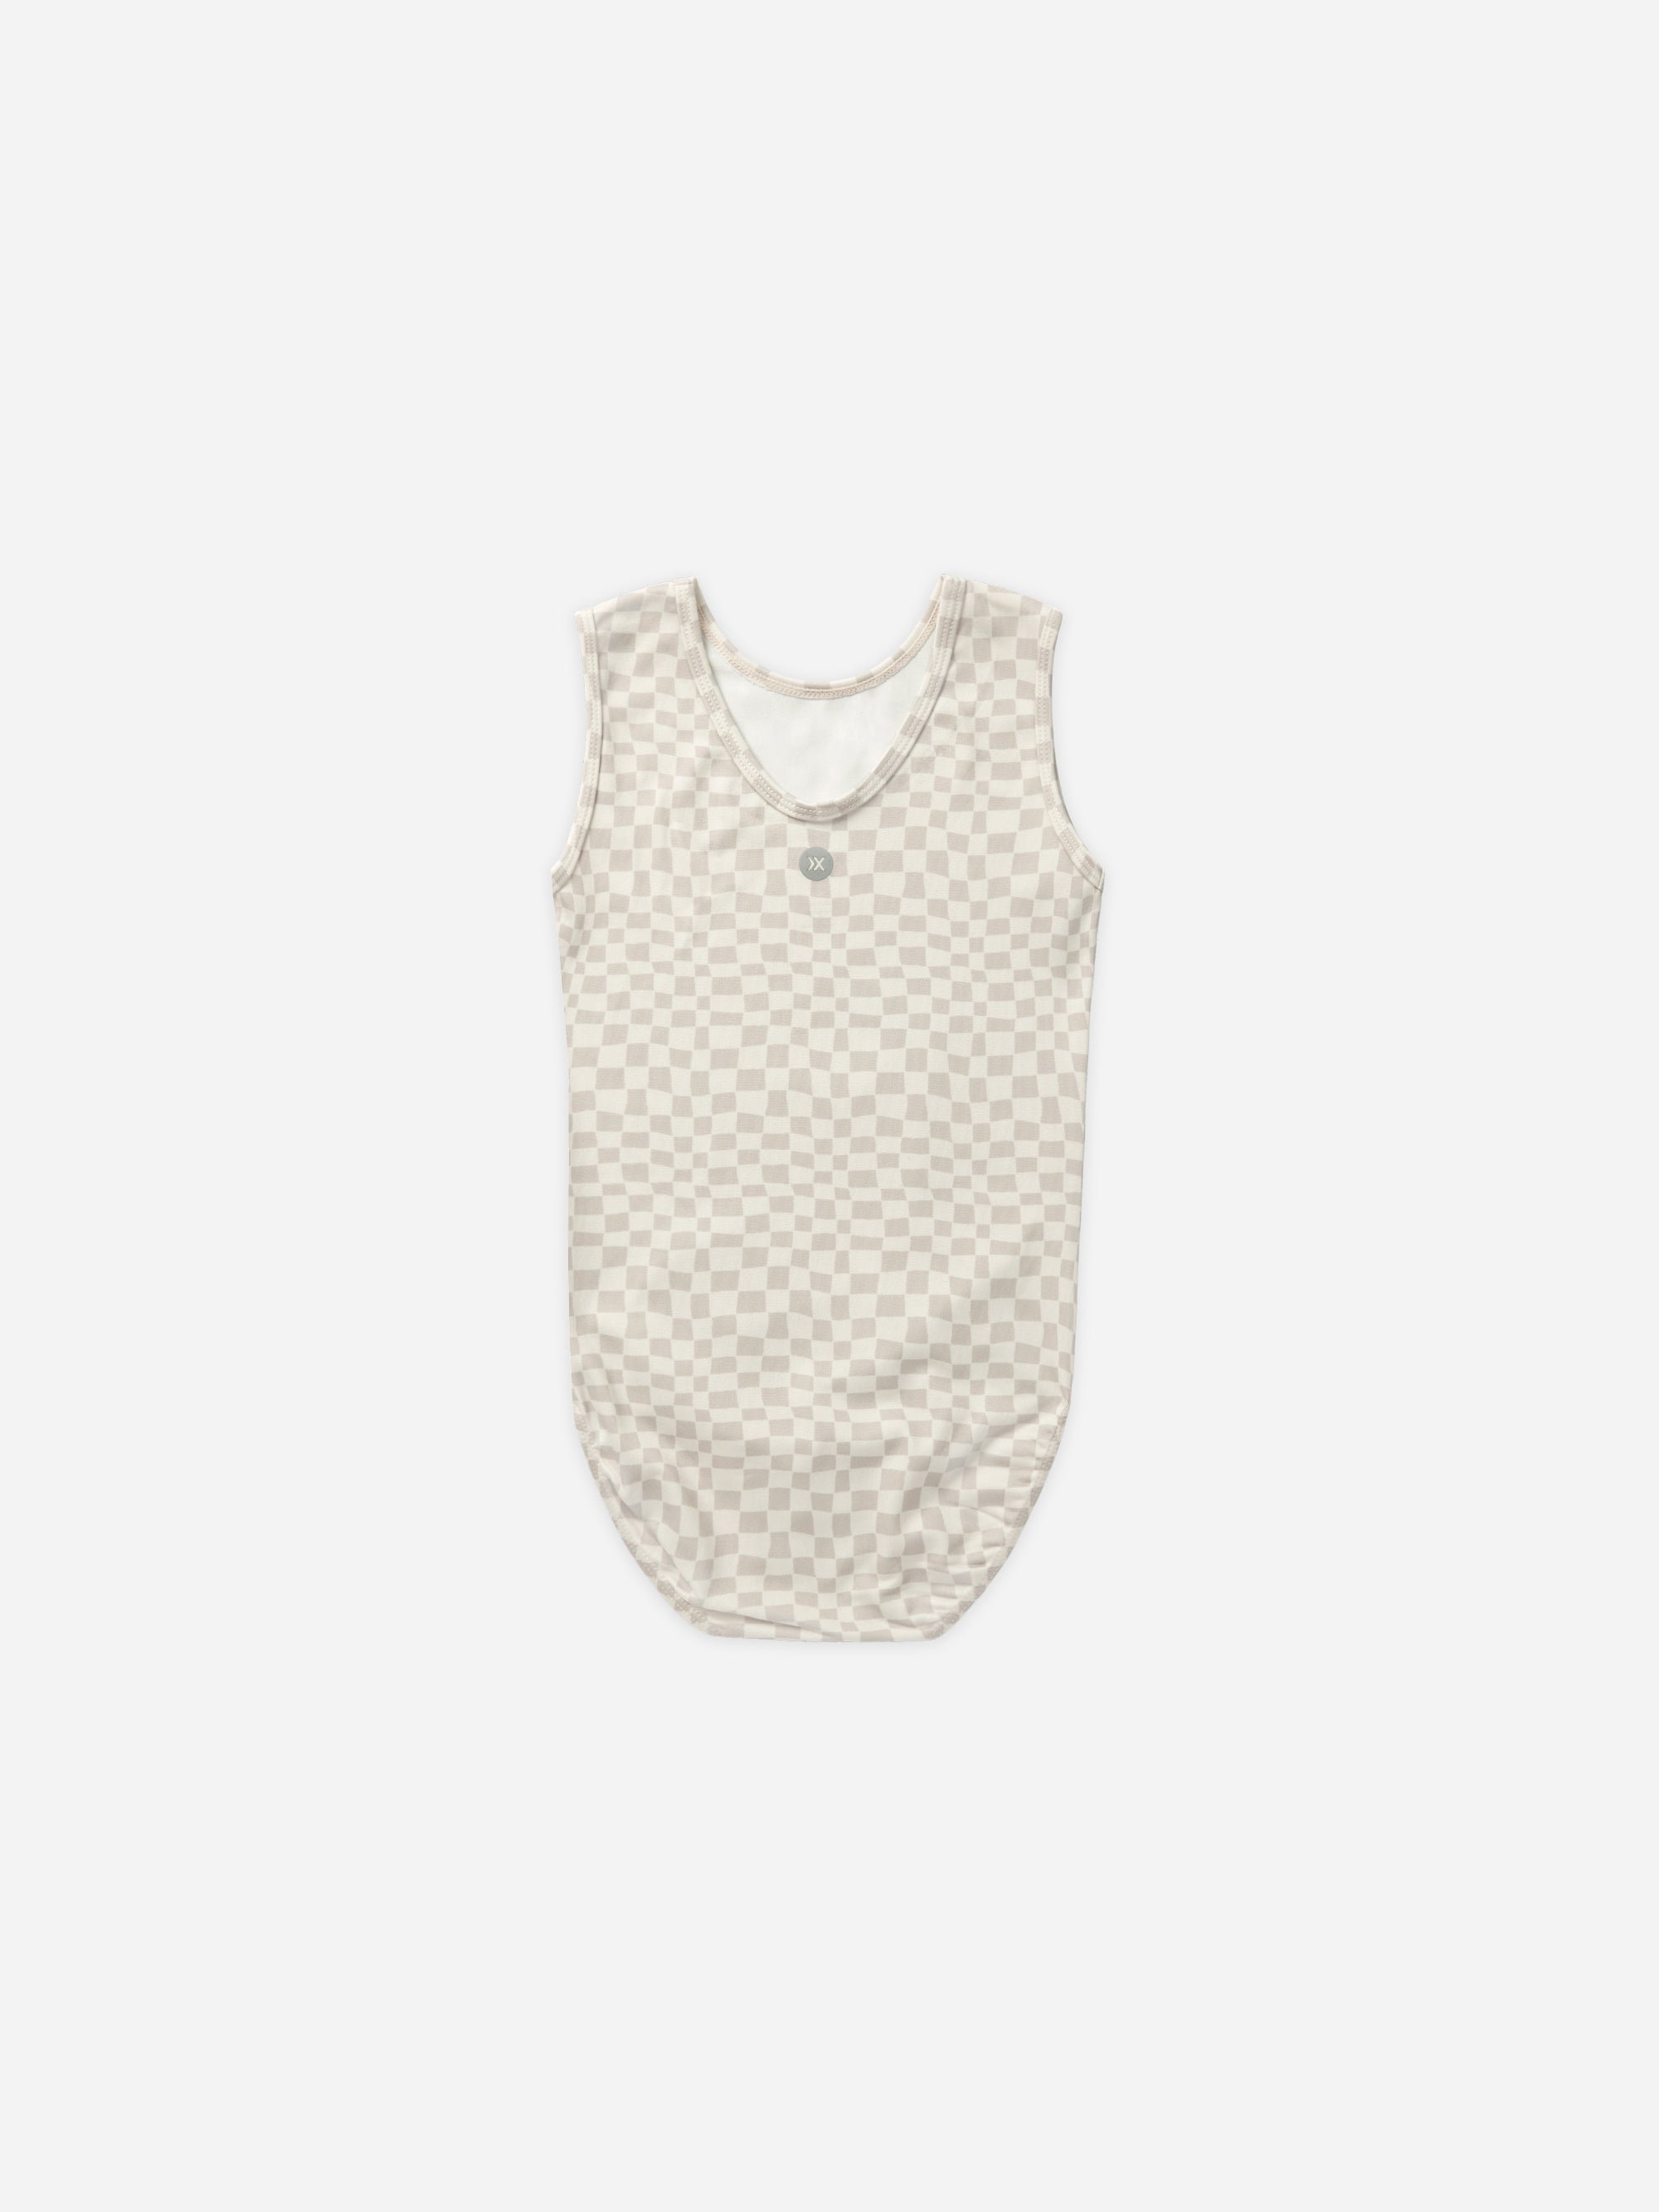 Basic Leotard || Dove Check - Rylee + Cru | Kids Clothes | Trendy Baby Clothes | Modern Infant Outfits |